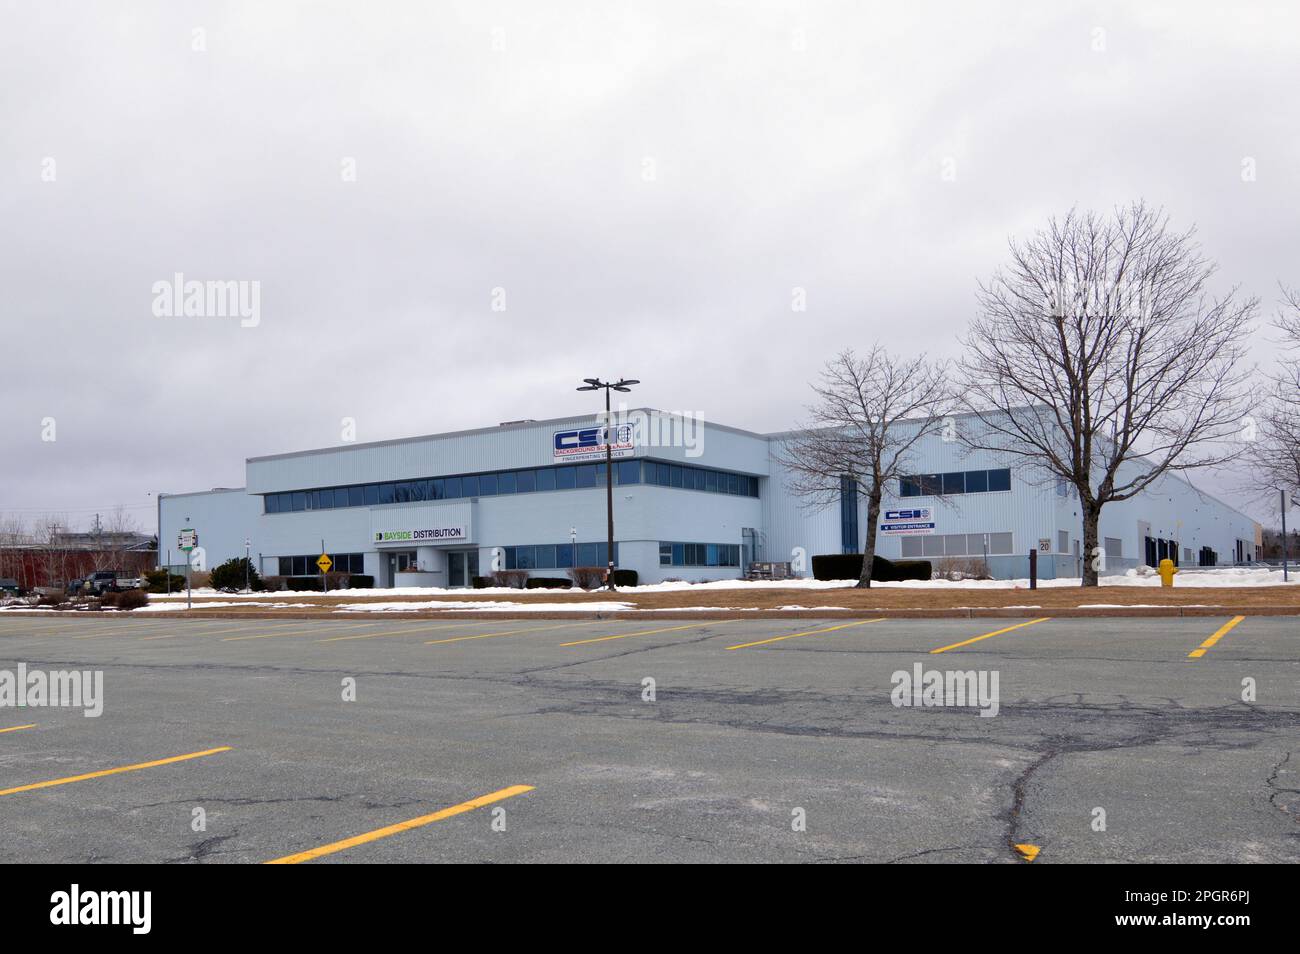 The former Volvo Halifax car assembly plant in Bayers Lake Industrial Park, Halifax, Canada, which operated from 1987 to 1998. Stock Photo